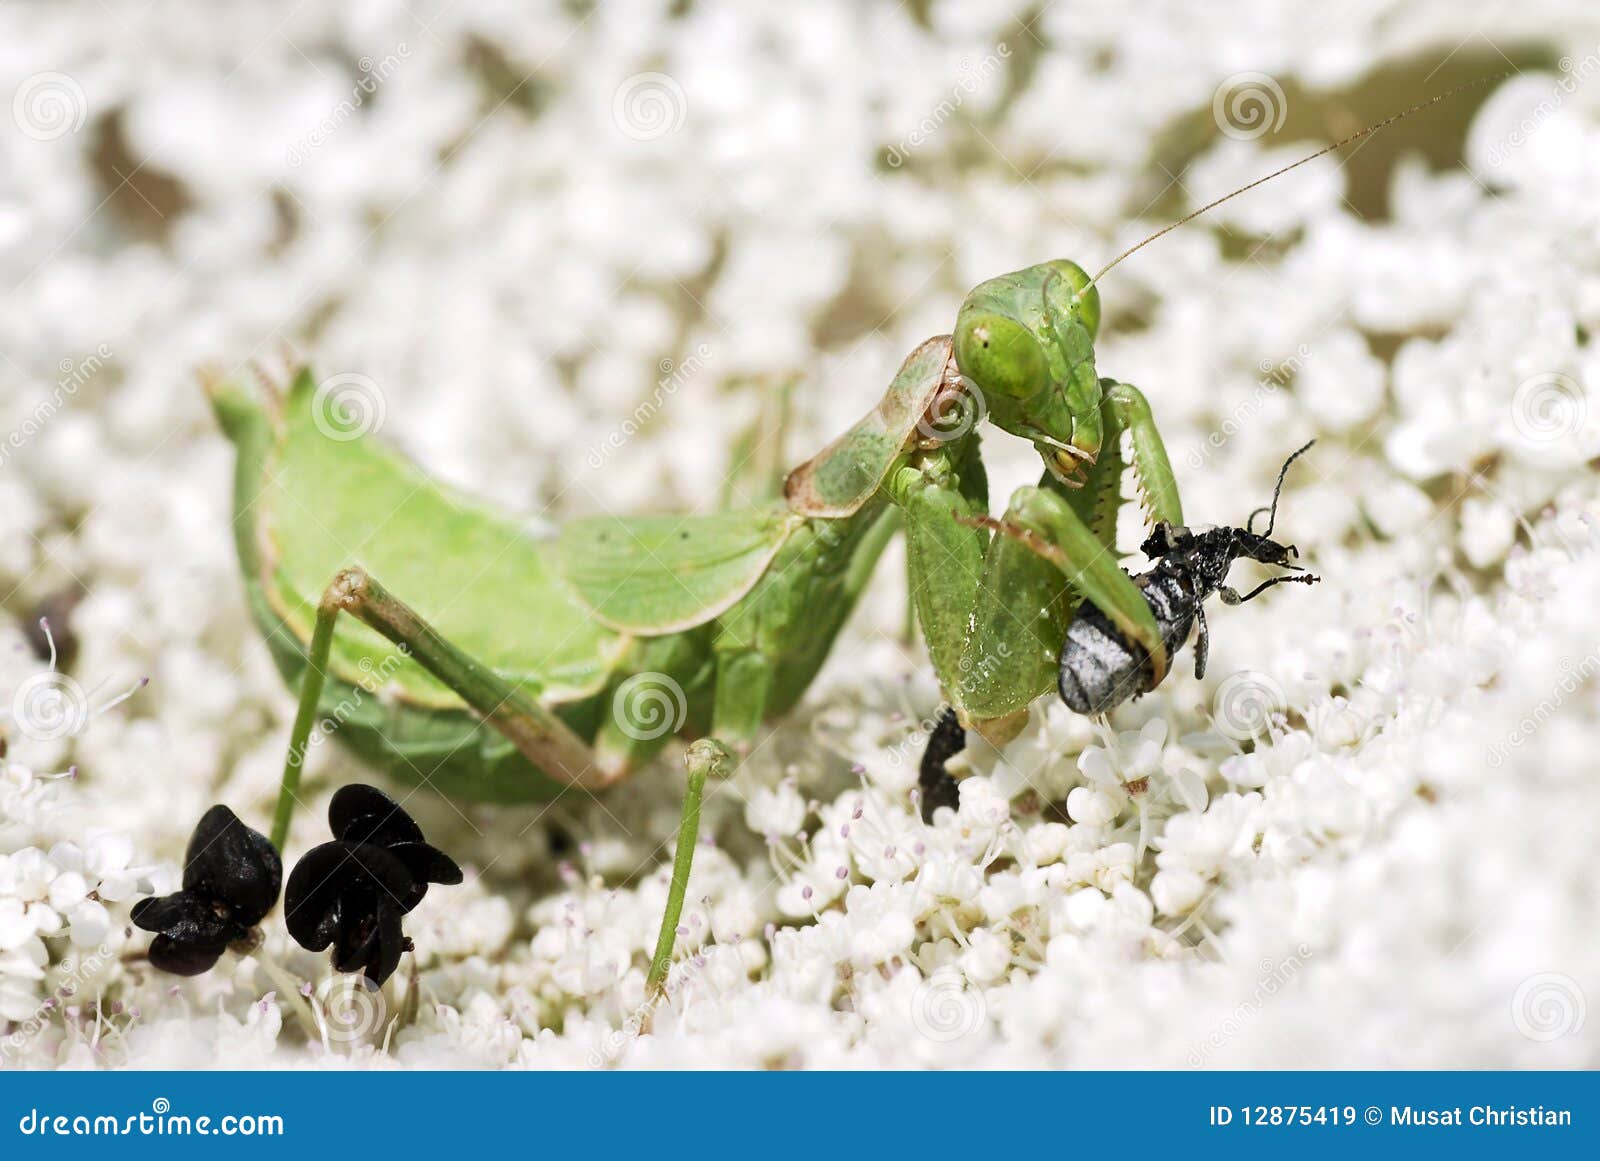 mantis religiosa eating an insect